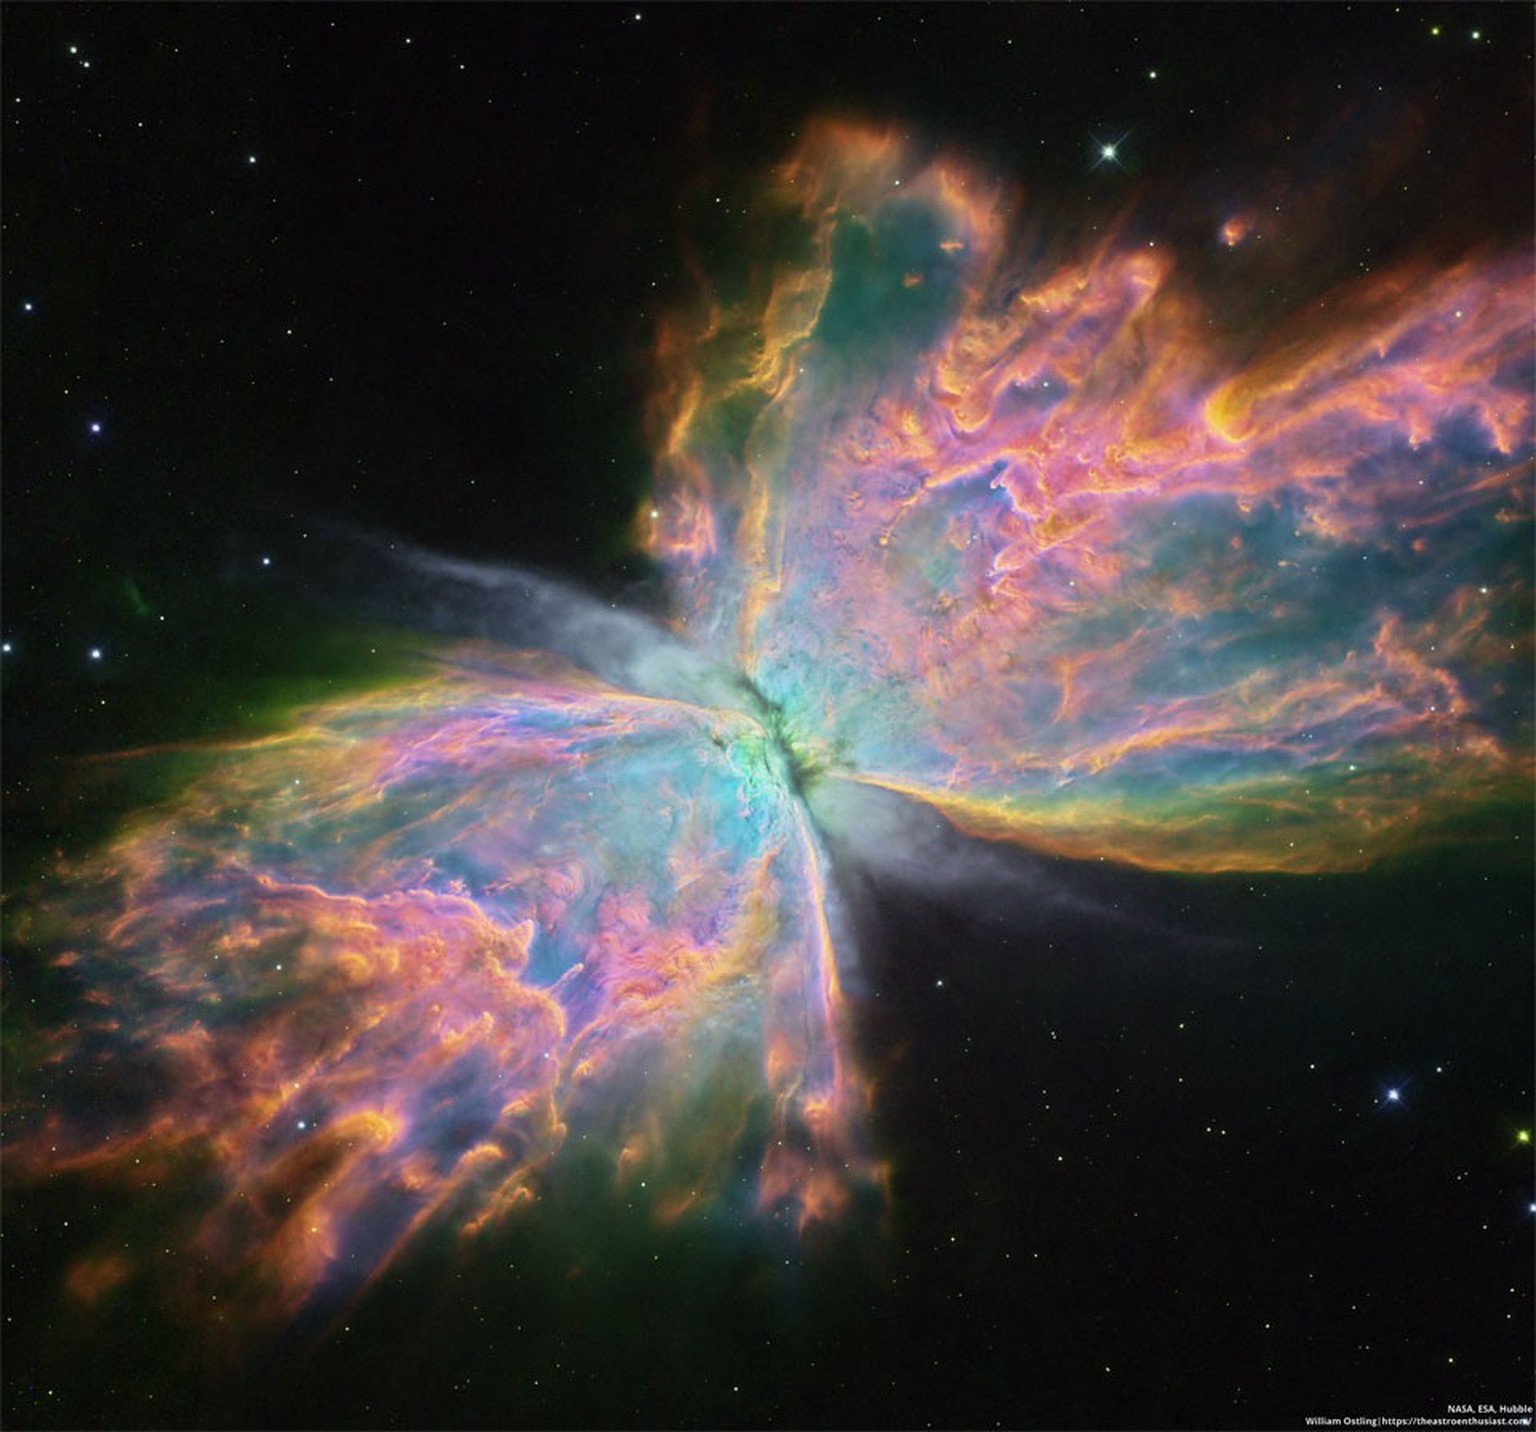 The Butterfly Nebula from Hubble 
Stars can make beautiful patterns as they age -- sometimes similar to flowers or insects. NGC 6302, the Butterfly Nebula, is a notable example. Though its gaseous win ...